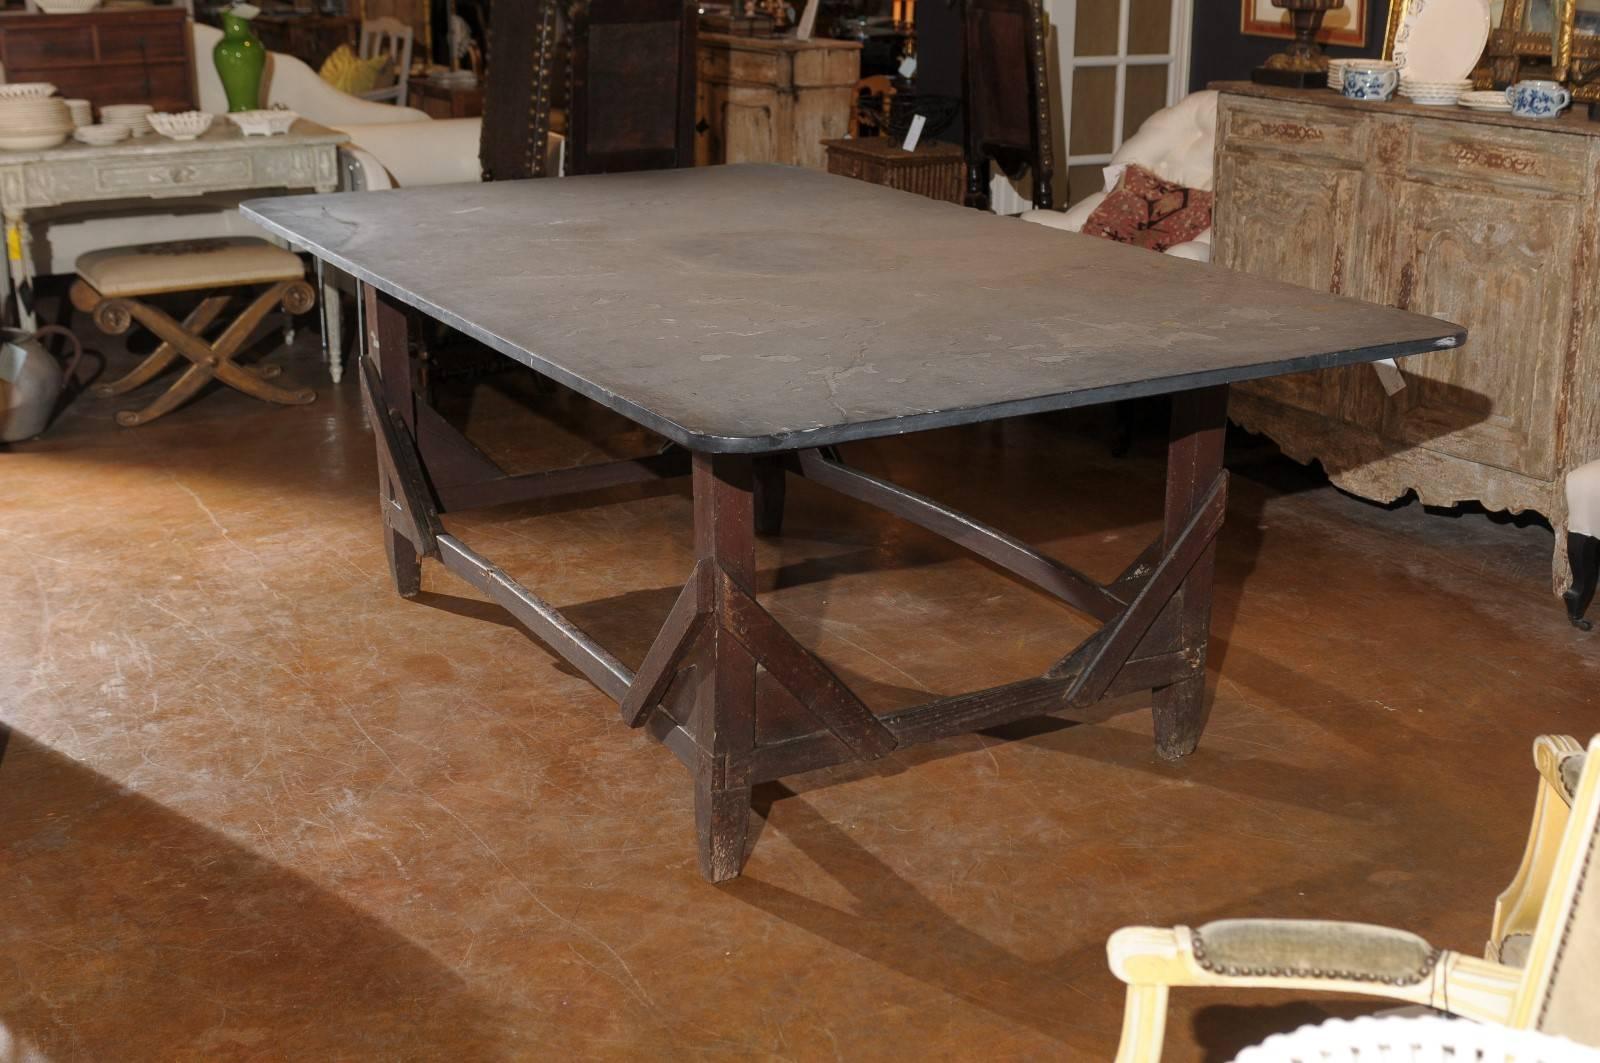 Italian Rustic Work Table with Bluestone Top and Stretchered Wooden Base 2